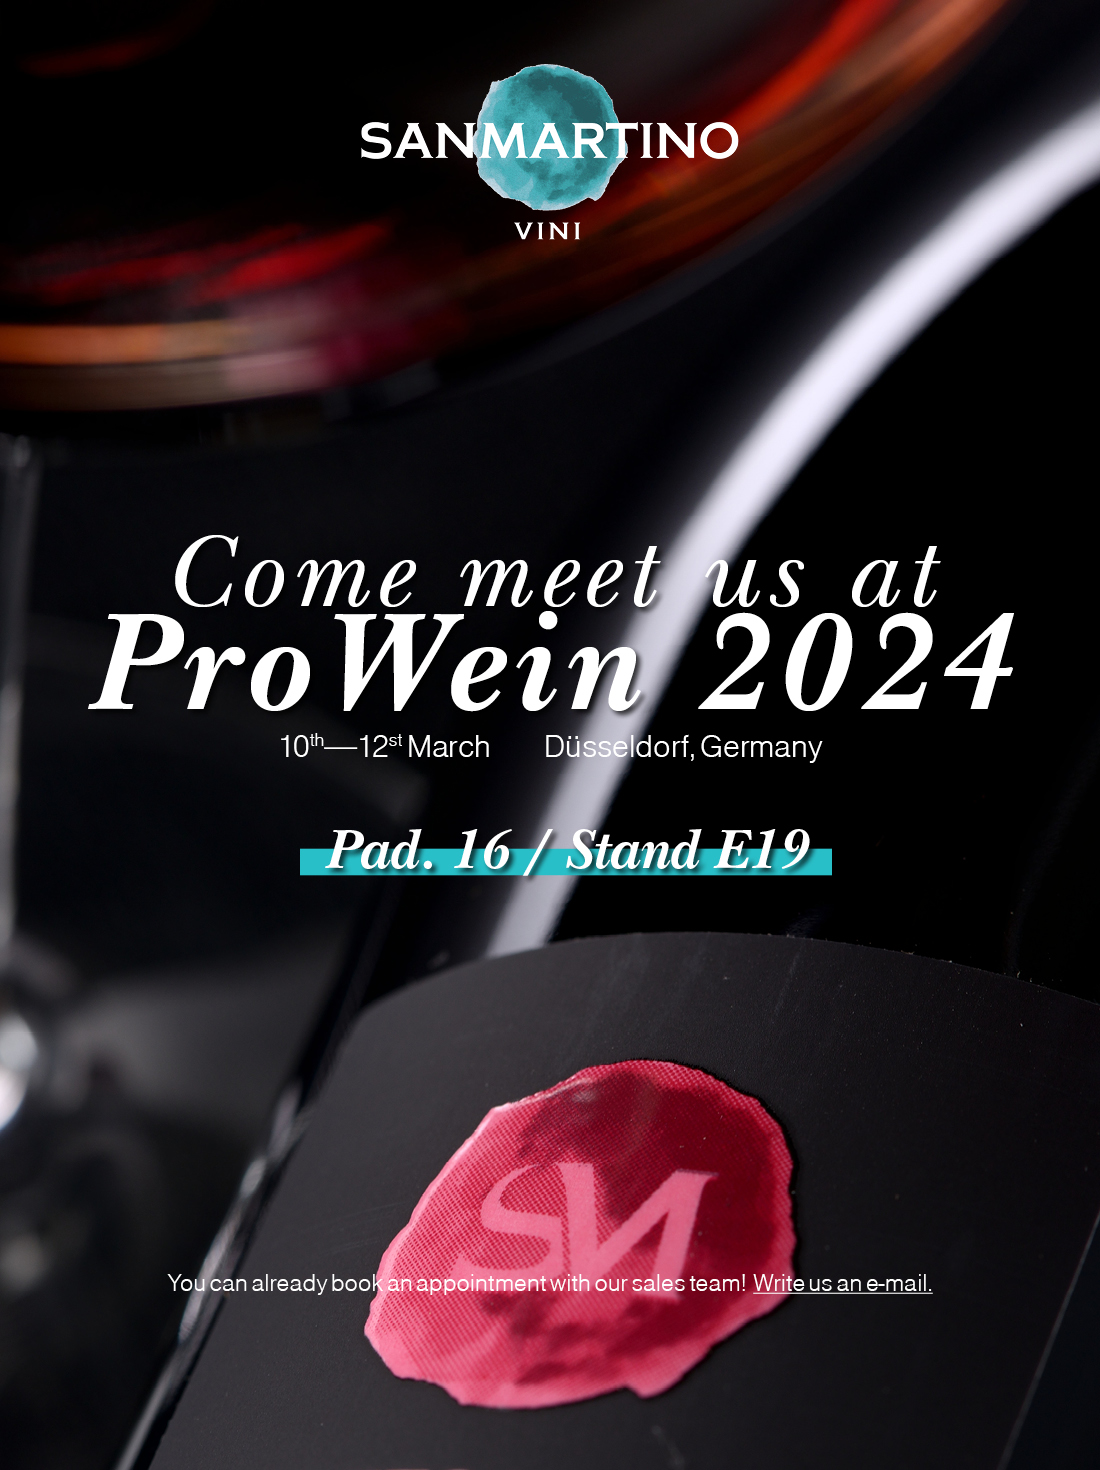 See you at ProWein 2024!